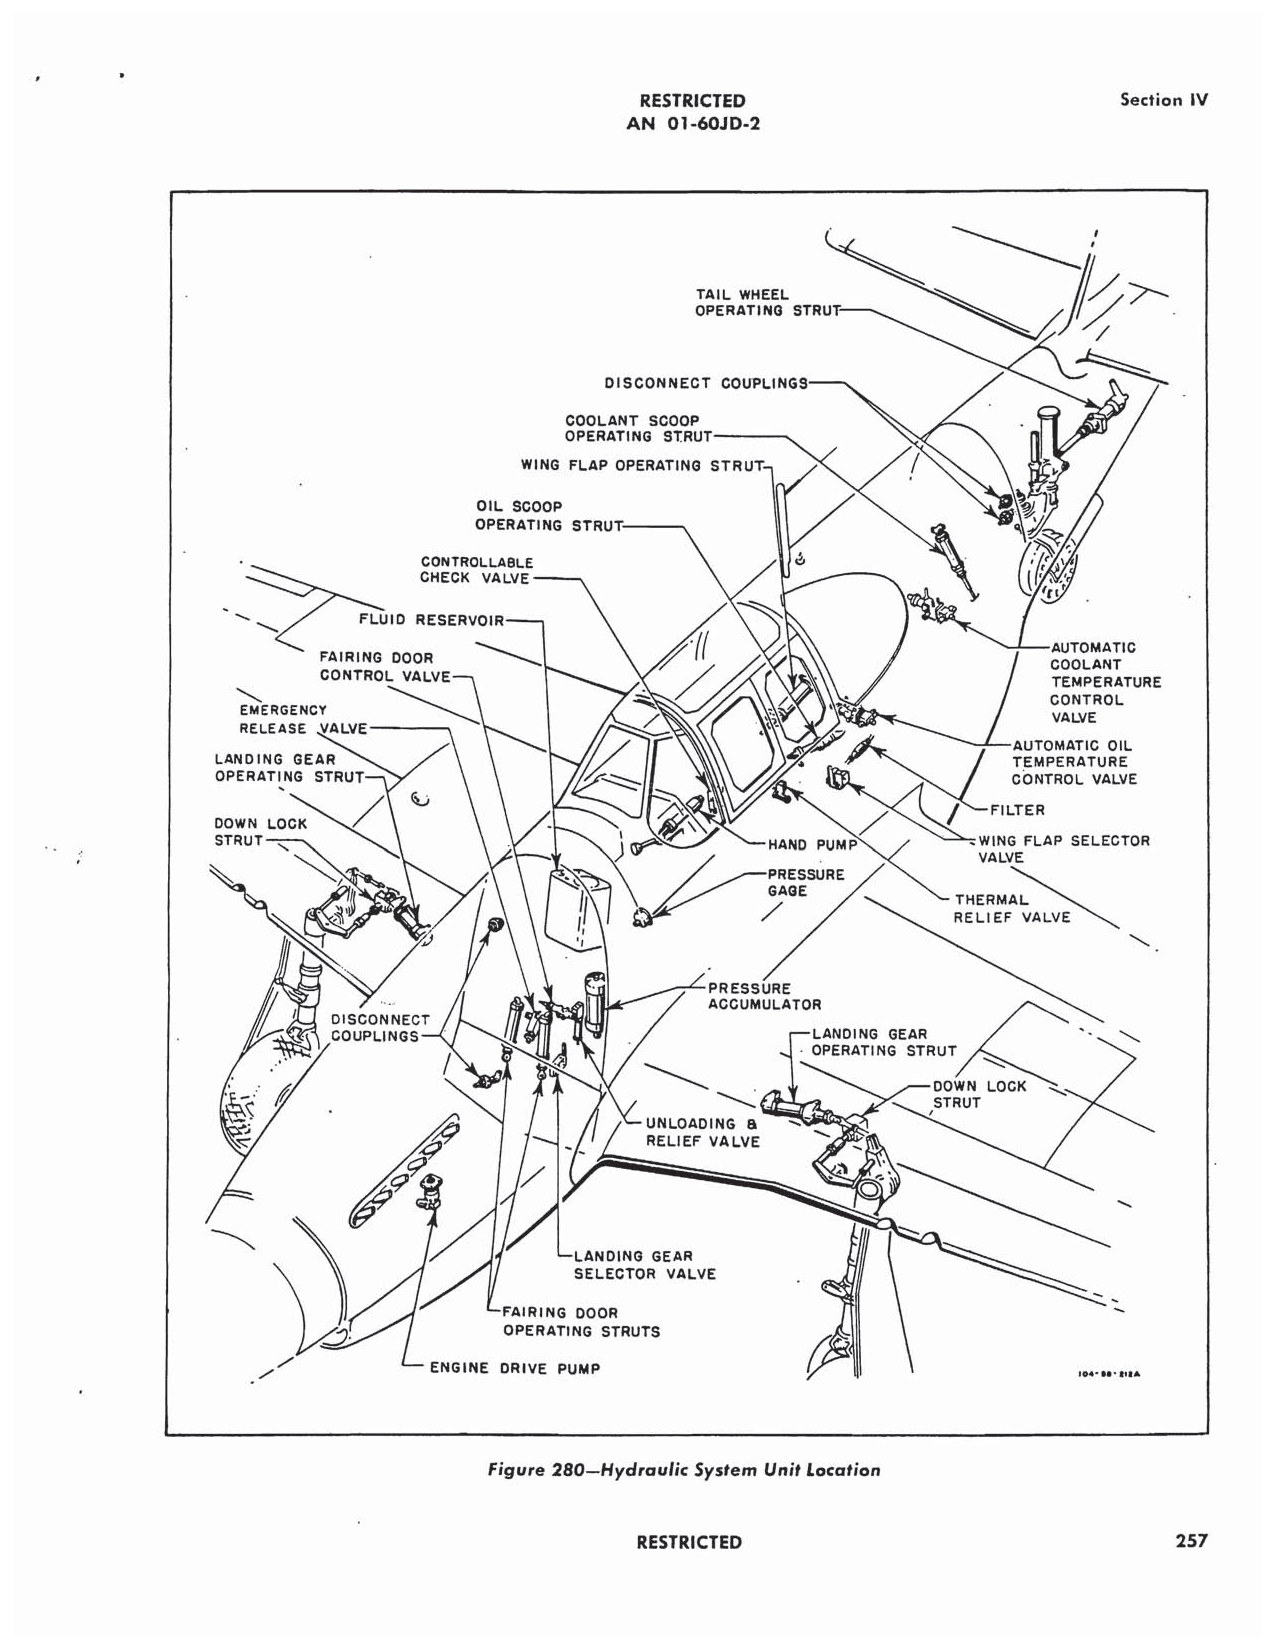 Sample page 261 from AirCorps Library document: Erection & Maintenance - P-51B P-51C